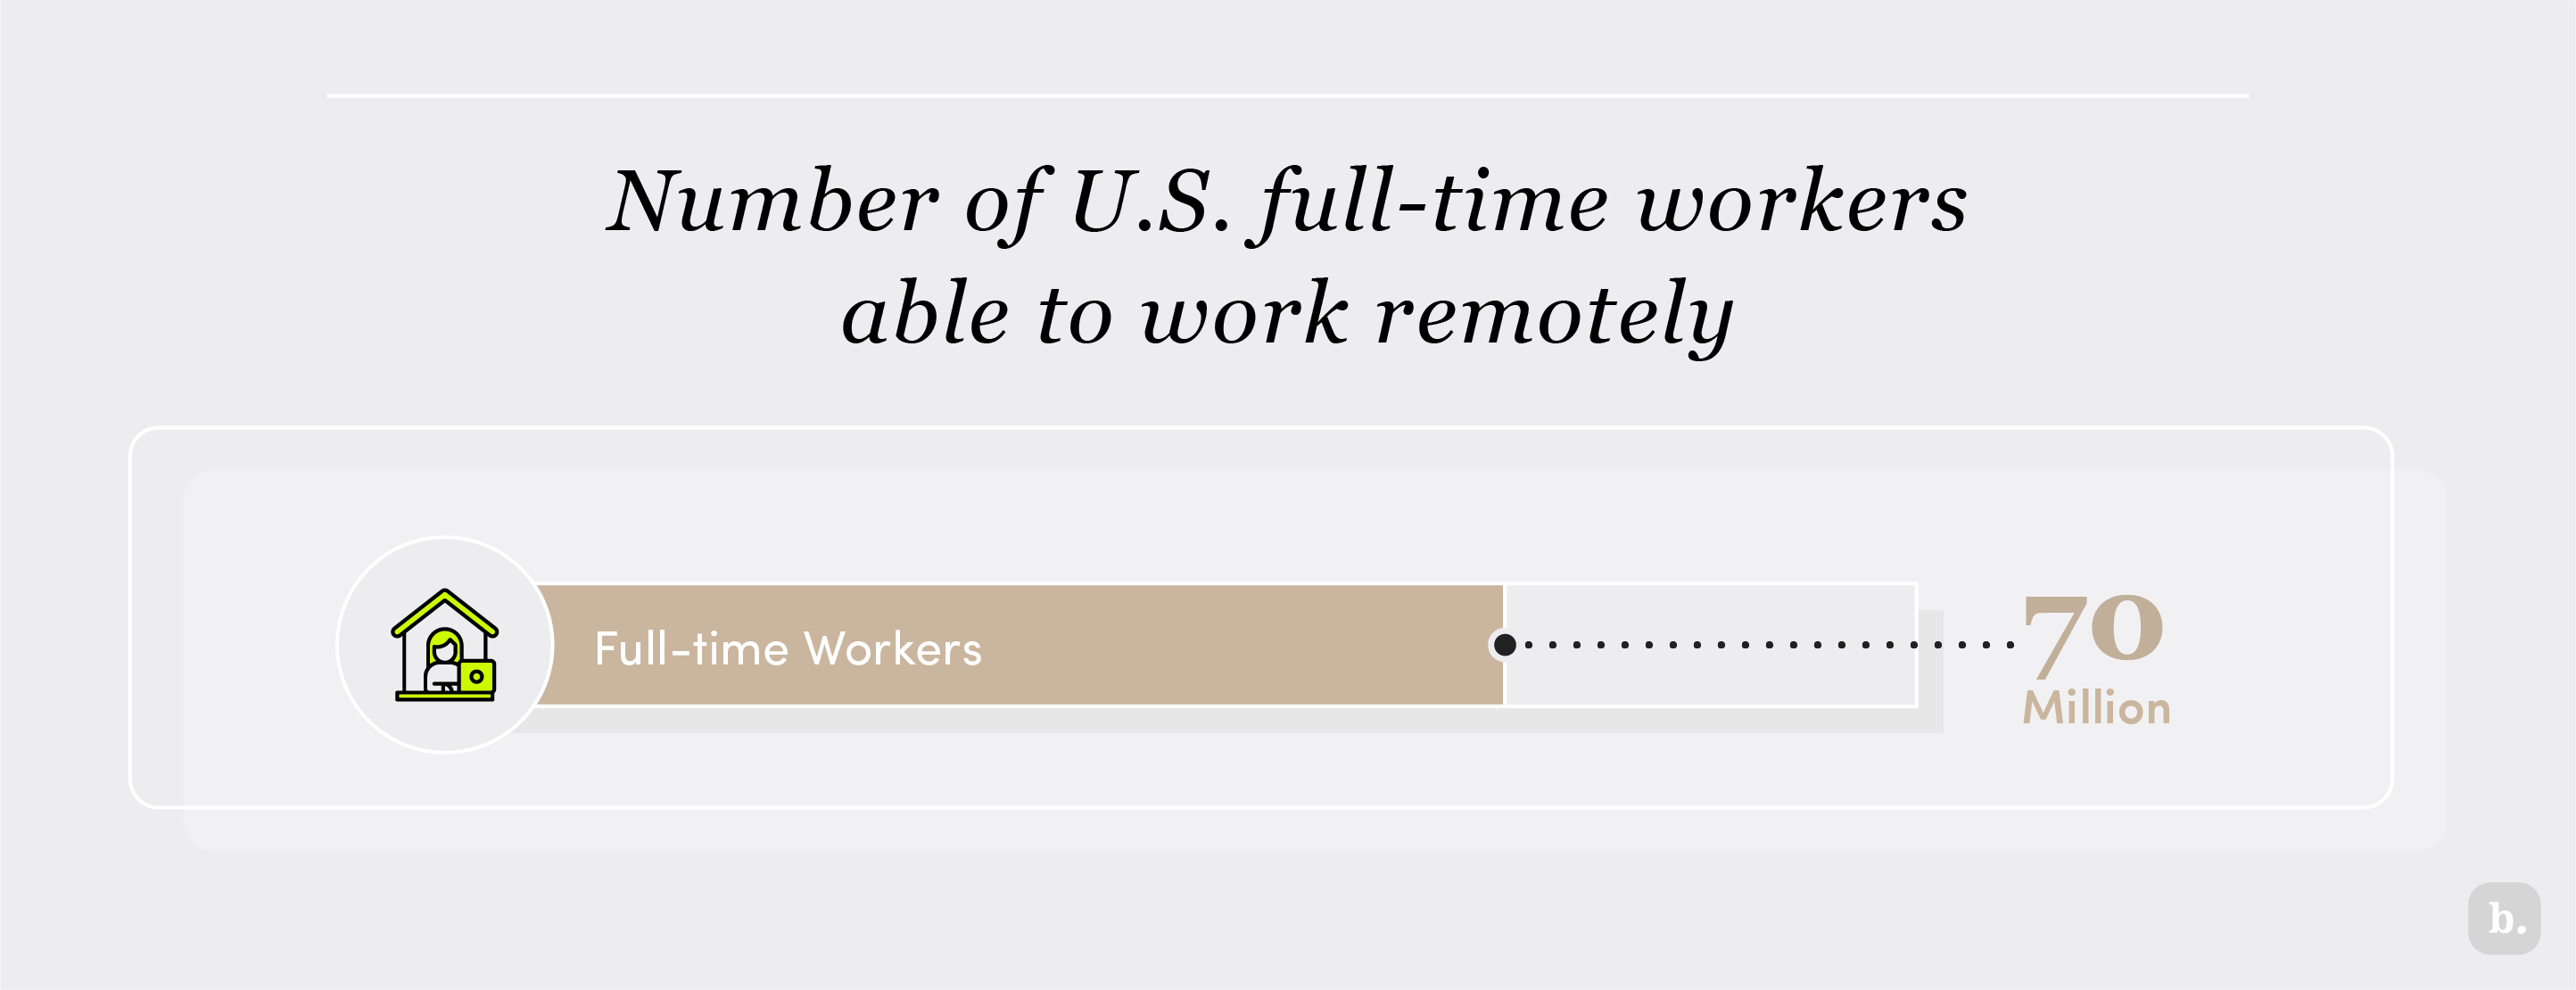 Number of U.S. full-tine workers able to work remotely graph